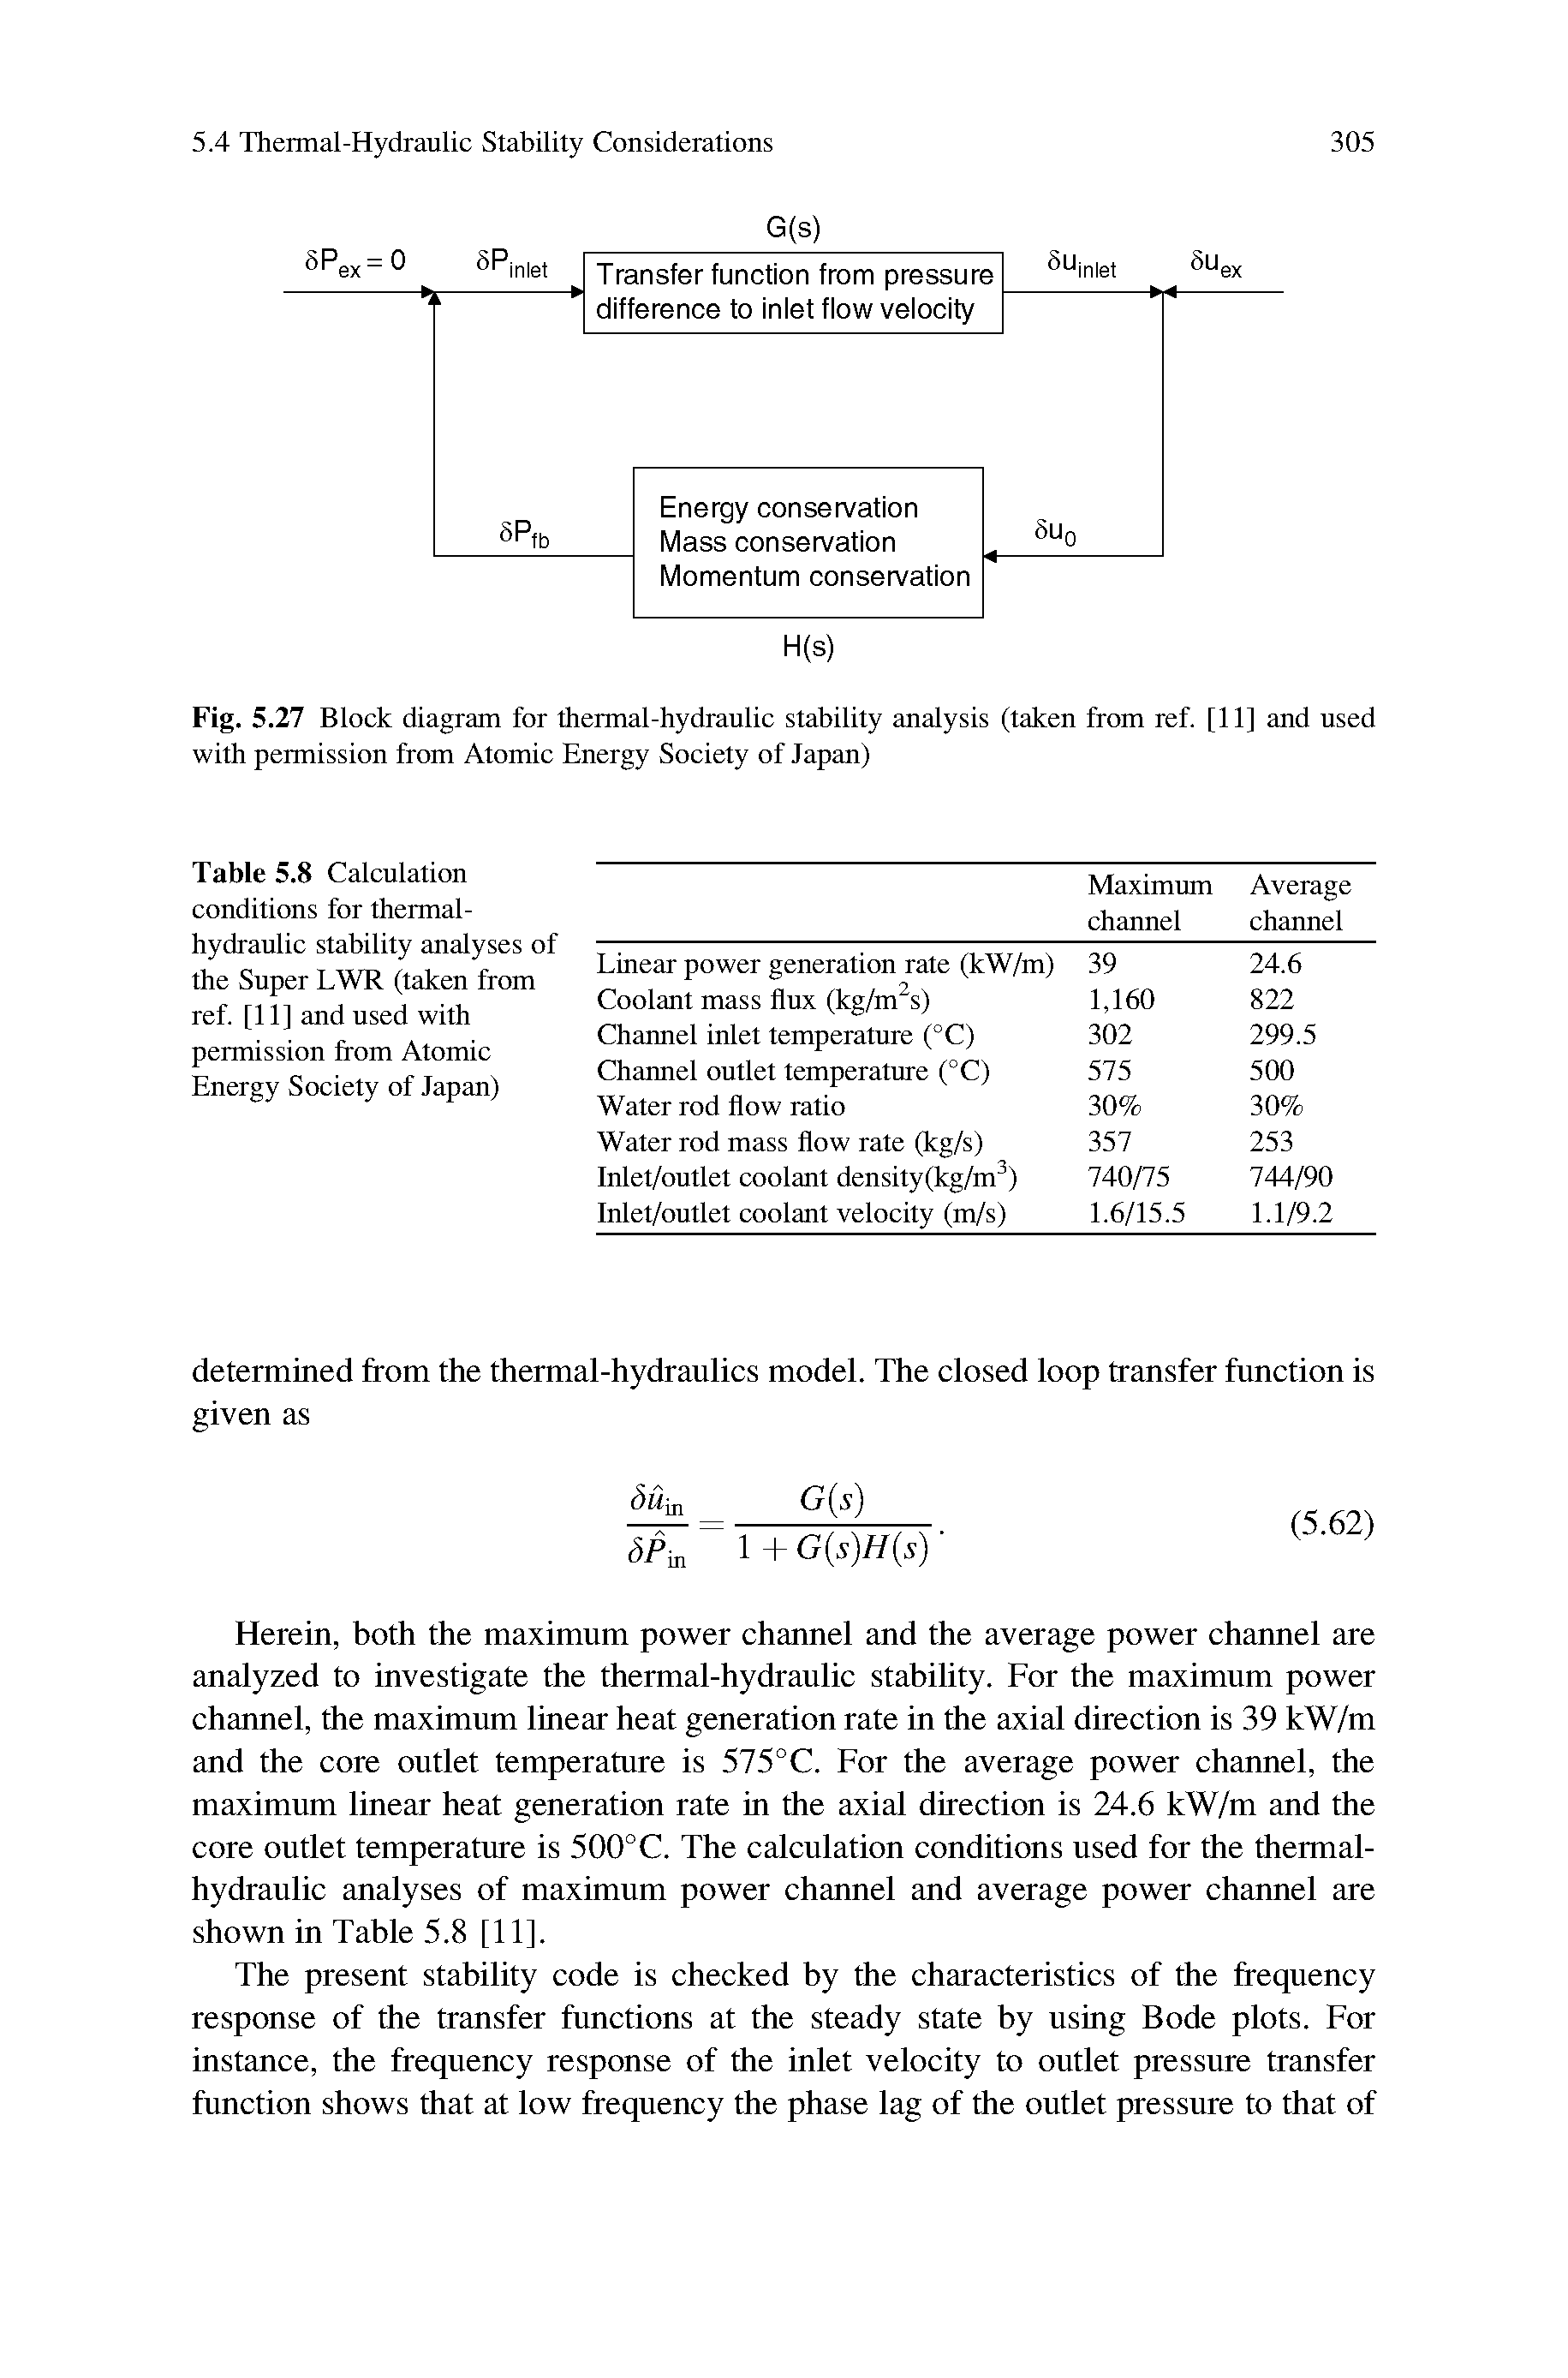 Table 5.8 Calculation conditions for thermal-hydraulic stability analyses of the Super LWR (taken from ref. [11] and used with permission from Atomic Energy Society of Japan)...